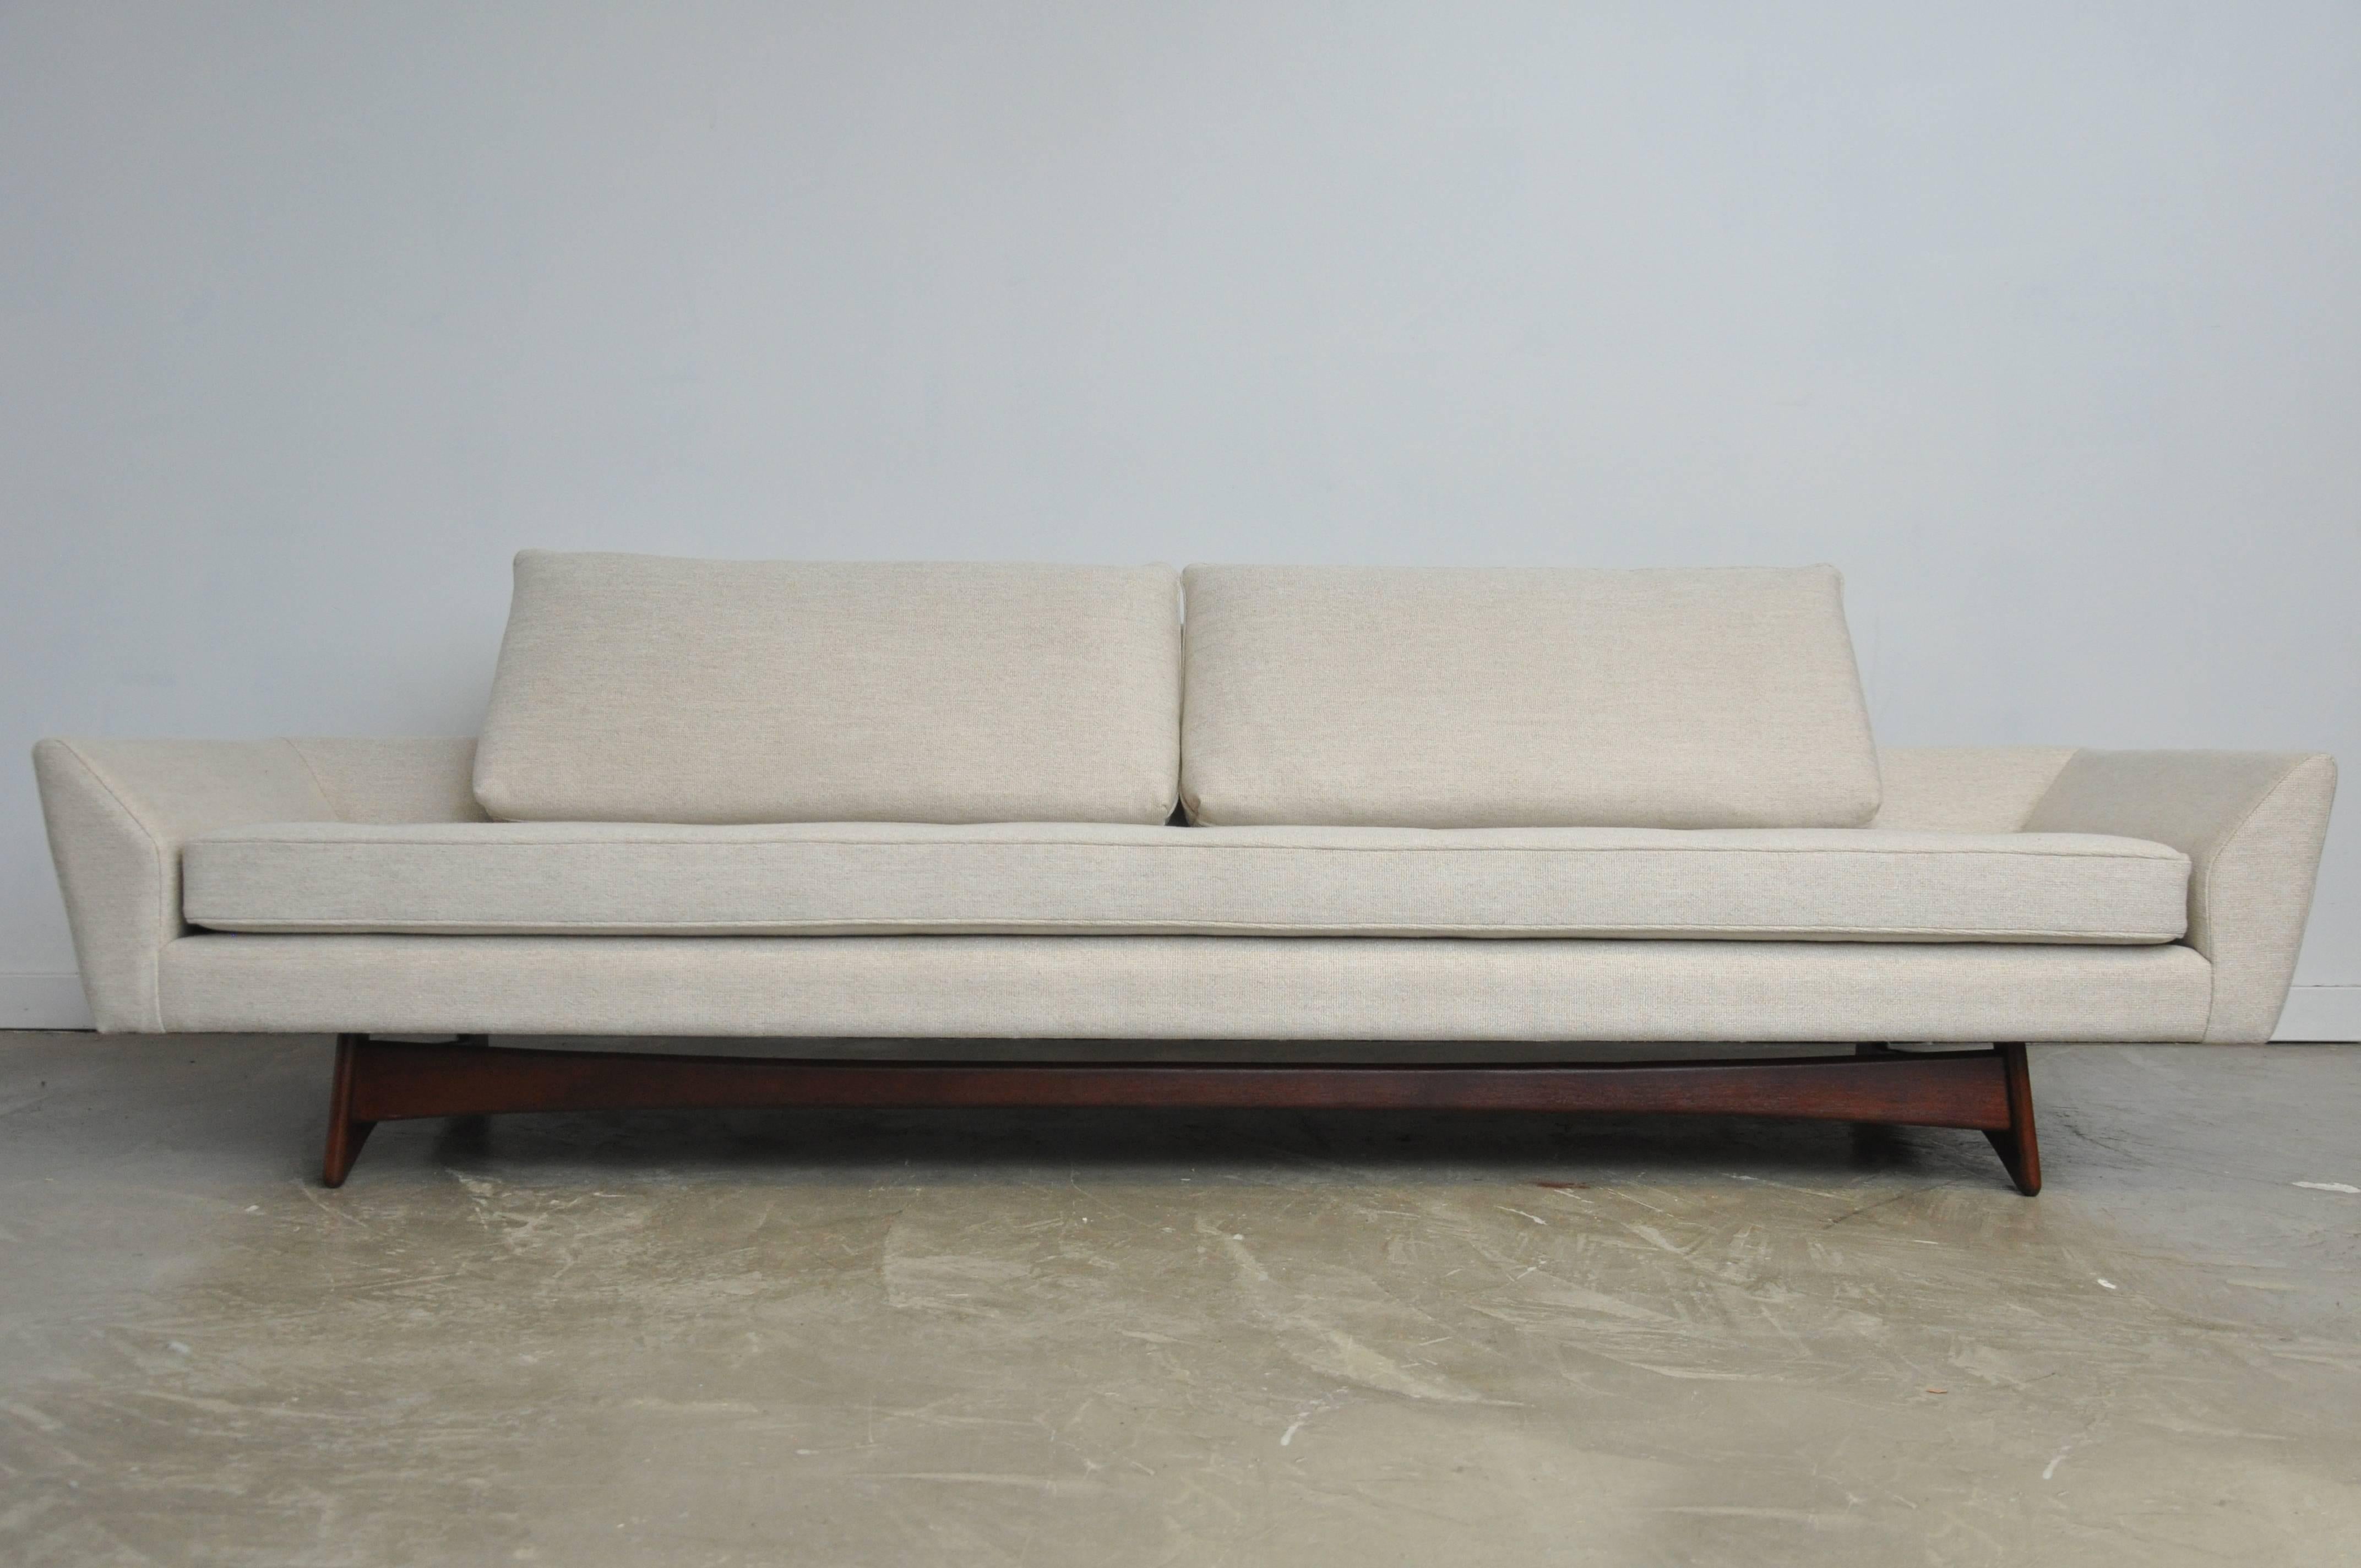 Adrian Pearsall sofa designed sofa on sculptural walnut base. Fully restored and reupholstered in oatmeal weave fabric.